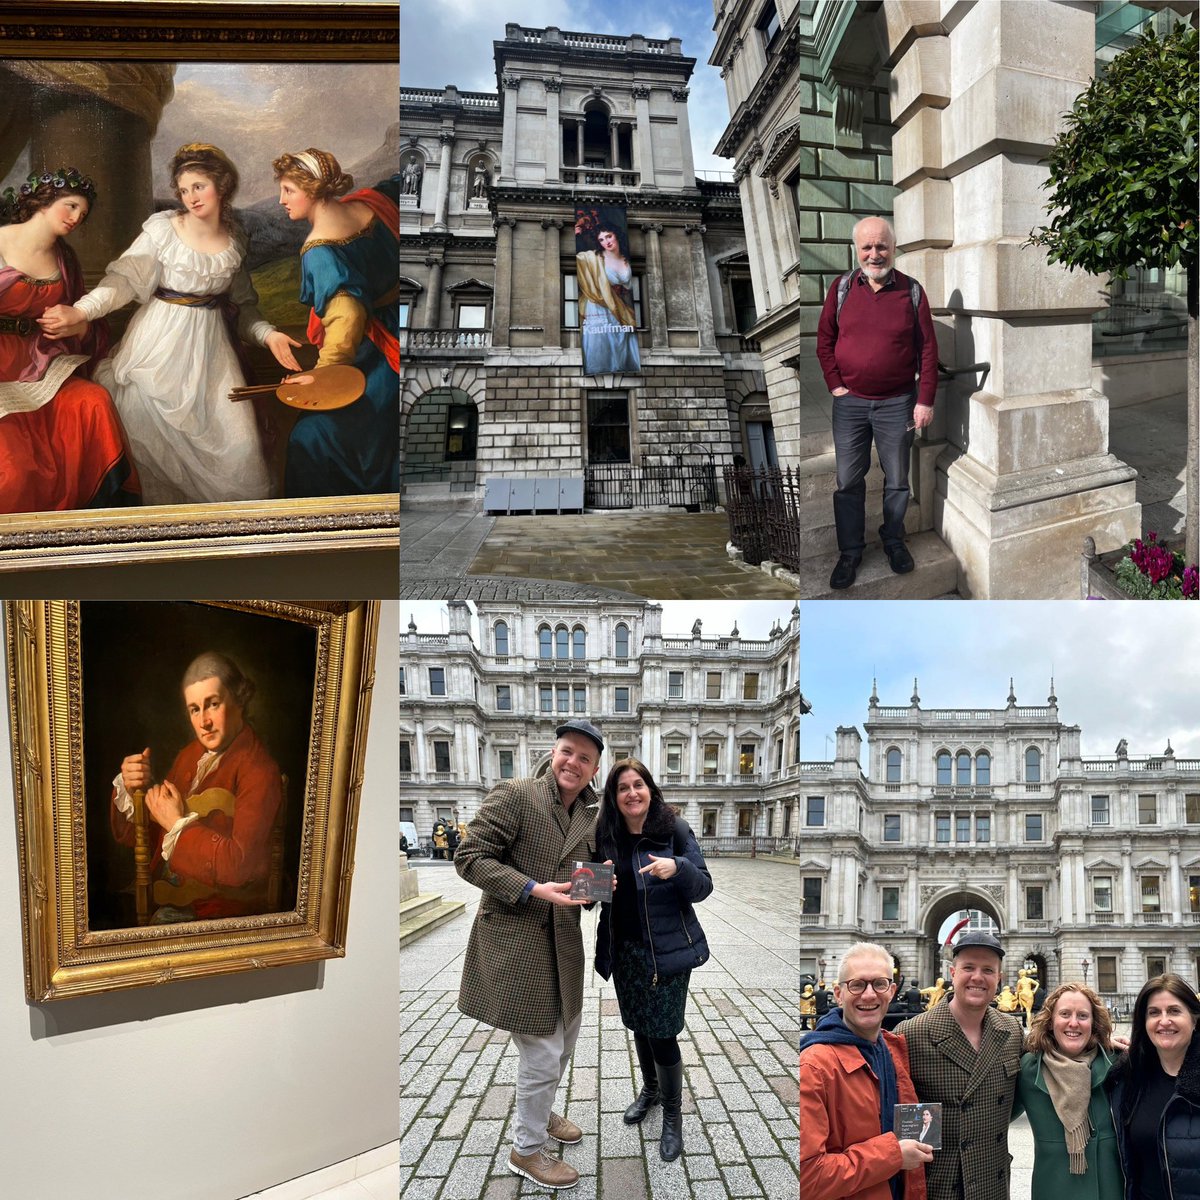 Amazing supervision for my @OOCDTP & @OUMusic doctoral work with wonderful Professor Reinhard Strohm from Oxford. We saw the portrait exhibition of Angelica Kauffman, 1 of only 2 women artists who founded the Royal Academy of Arts in 1768 at Burlington House where Handel lived.